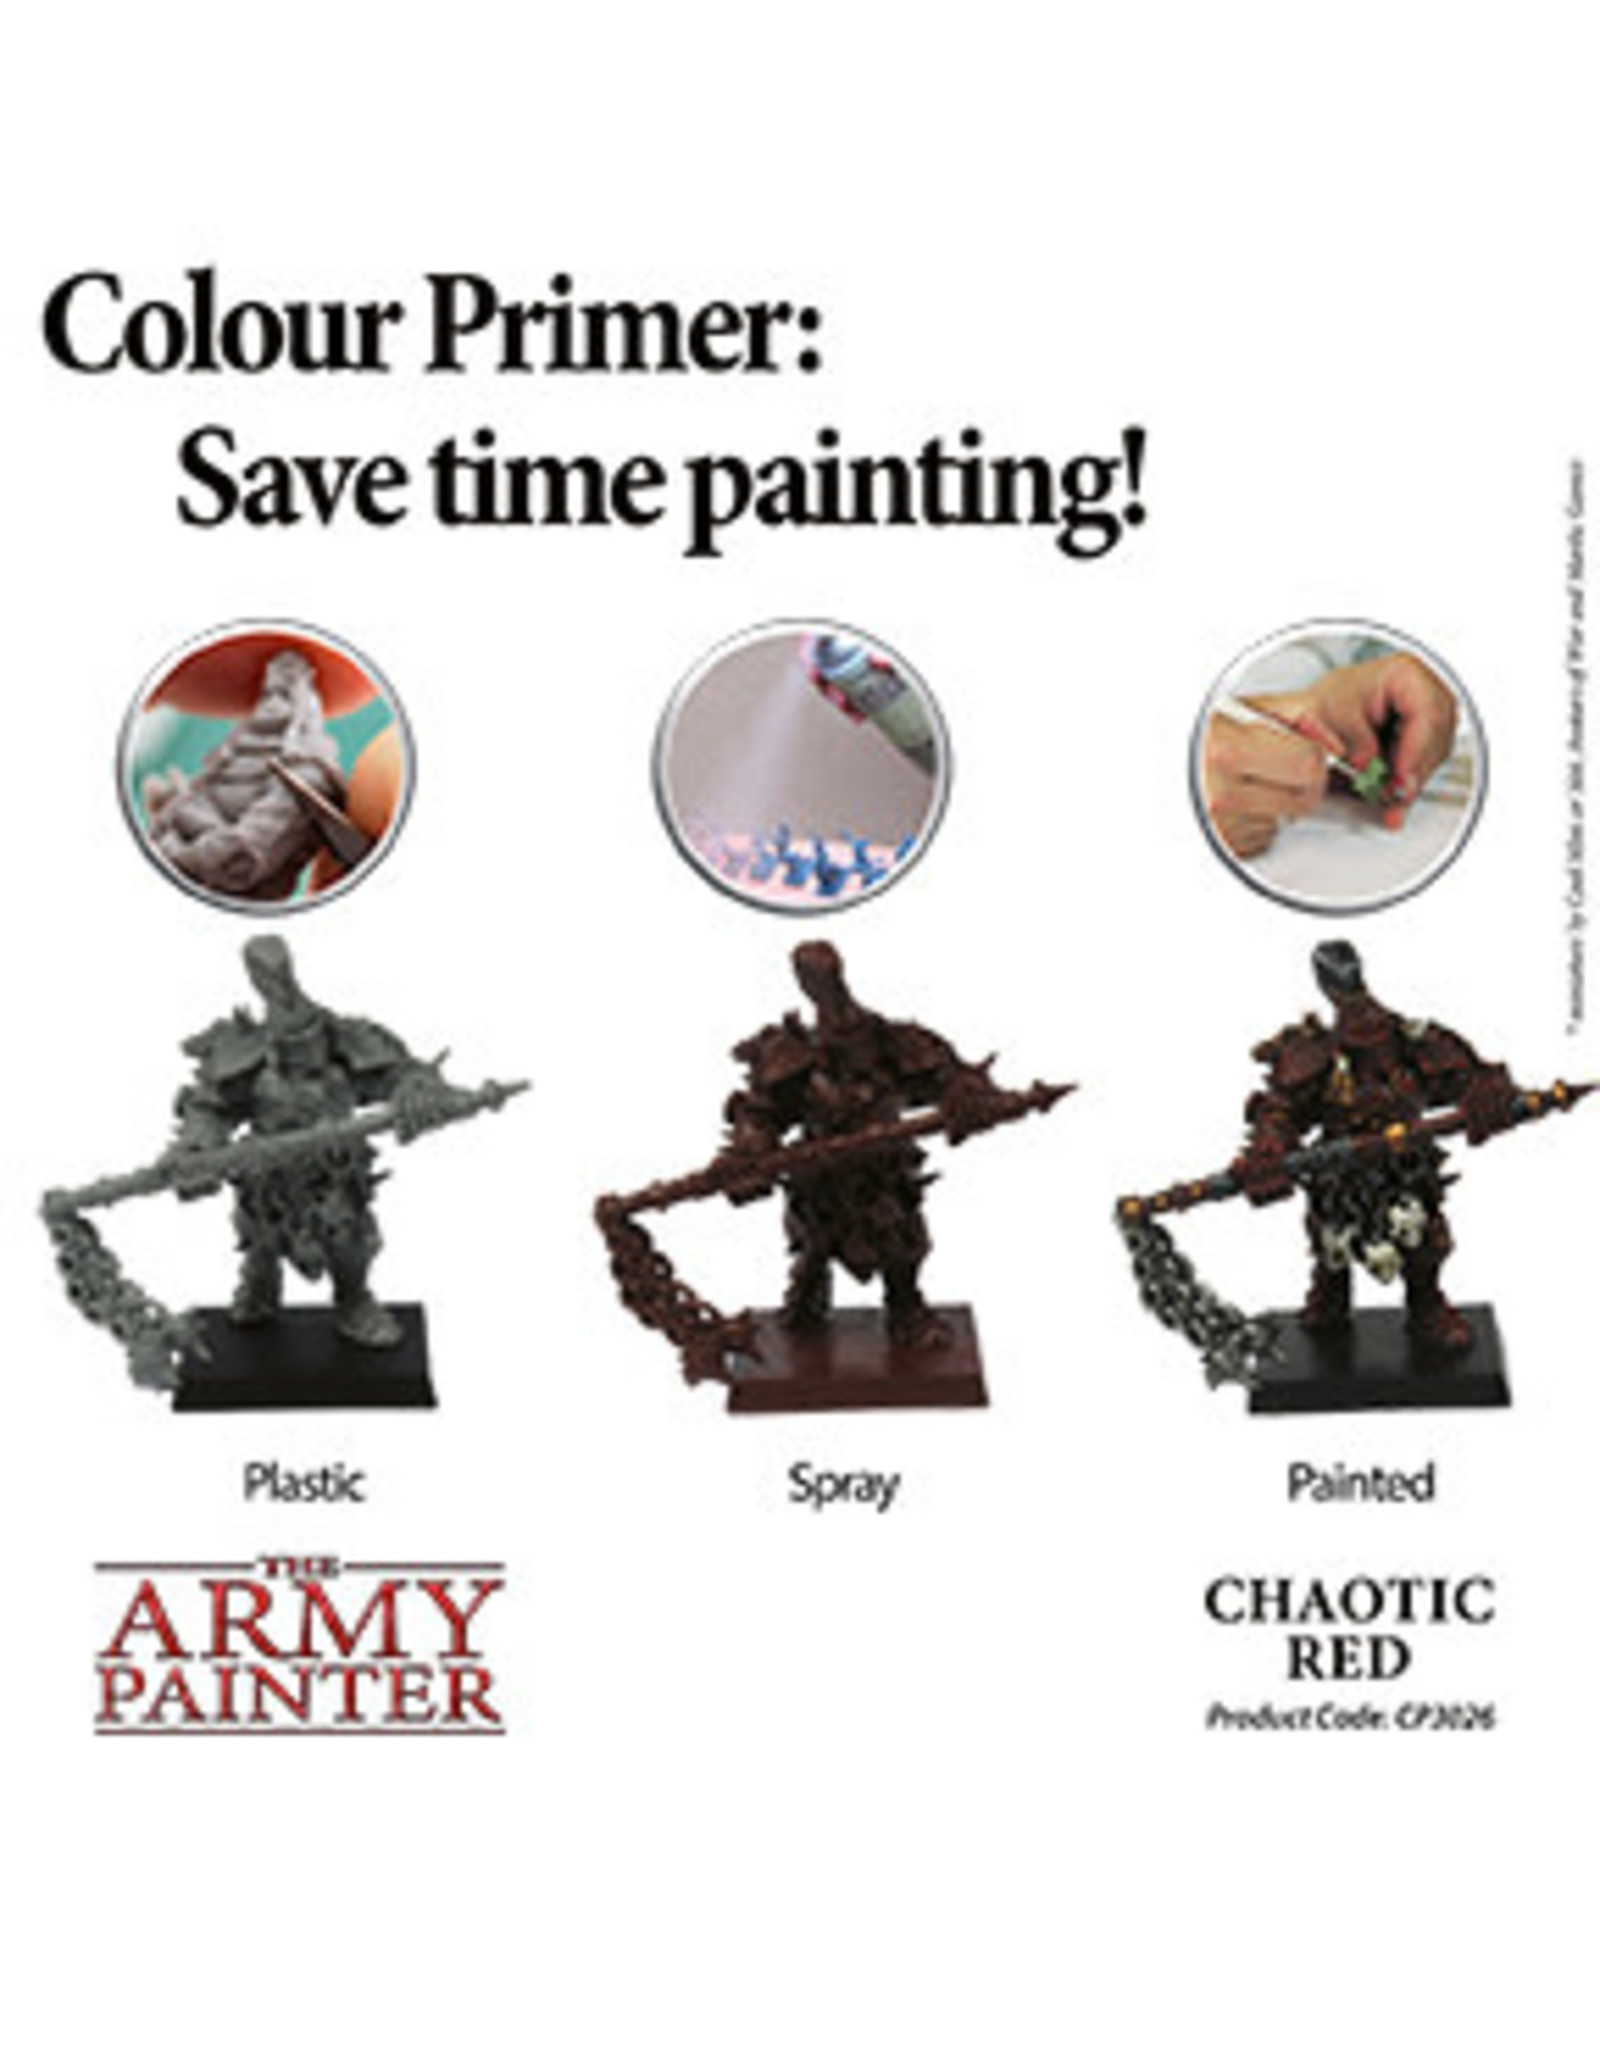 Army Painter Colour Primer Chaotic Red